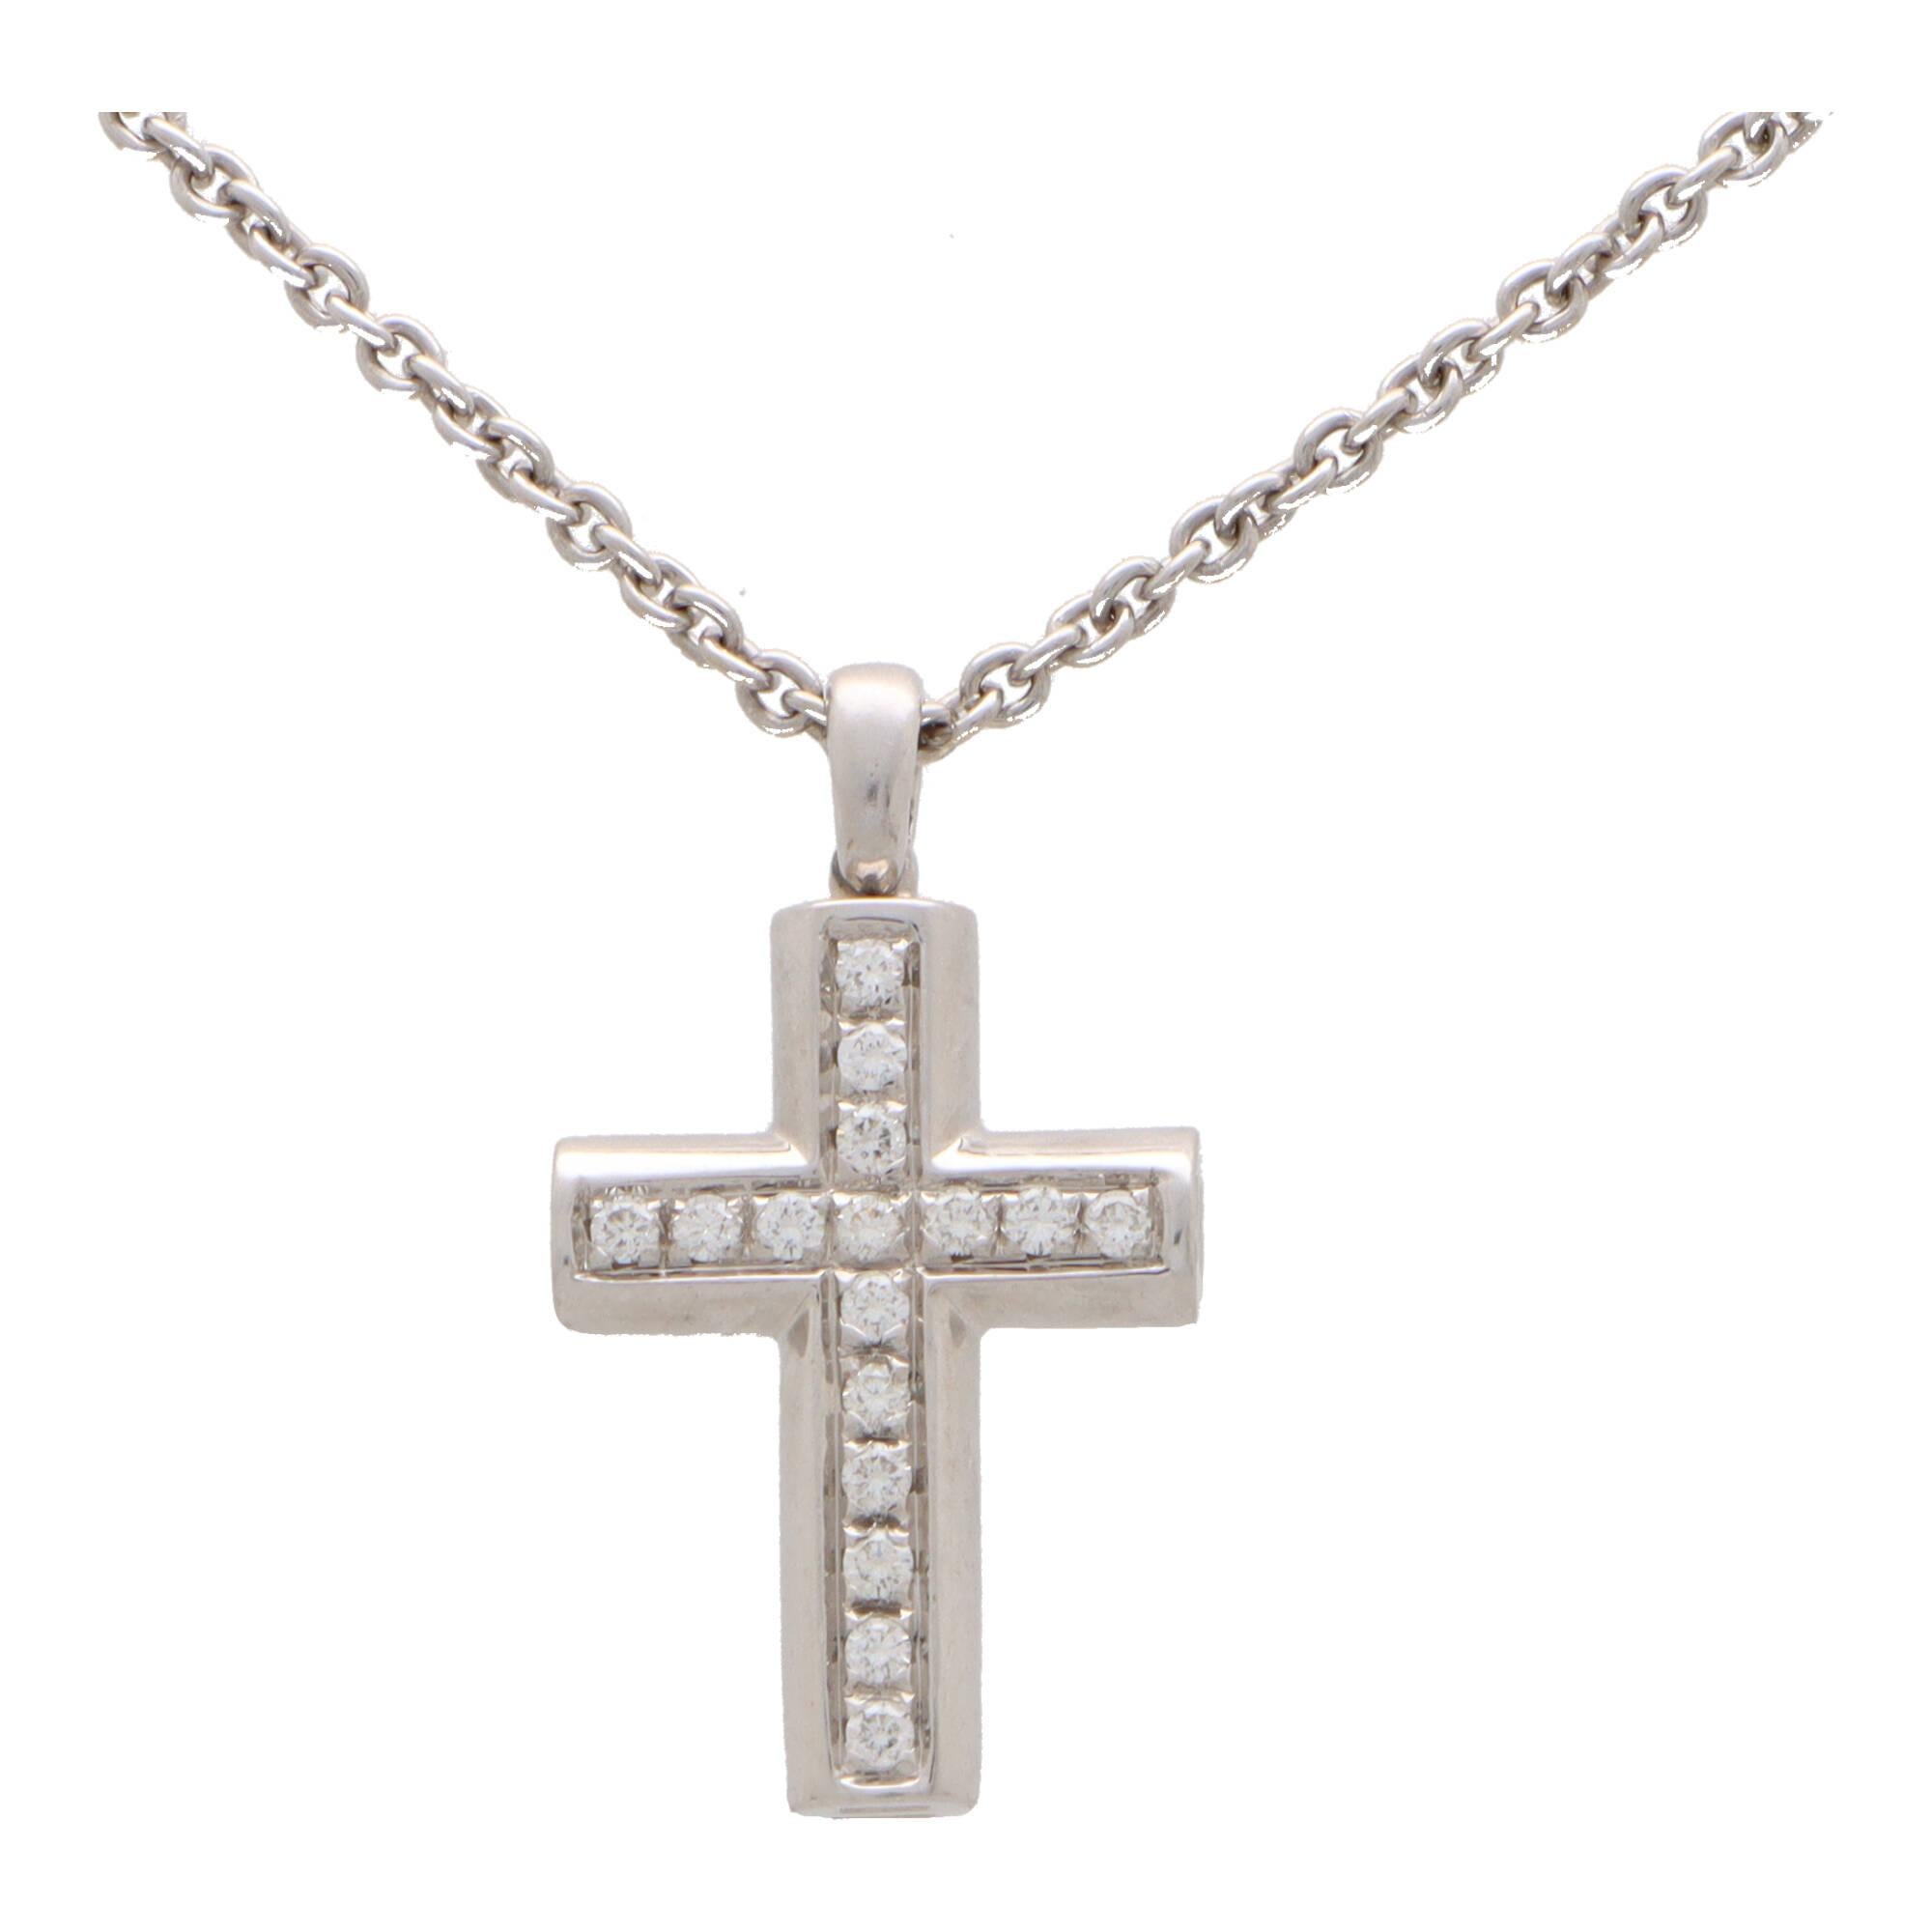 A stylish vintage Bvlgari Latin cross necklace set in 18k white gold.

The pendant depicts a cross motif and is pave set with exactly 16 round brilliant cut diamonds. The cross hangs from a polished white gold bail set bail. Accompanied with the